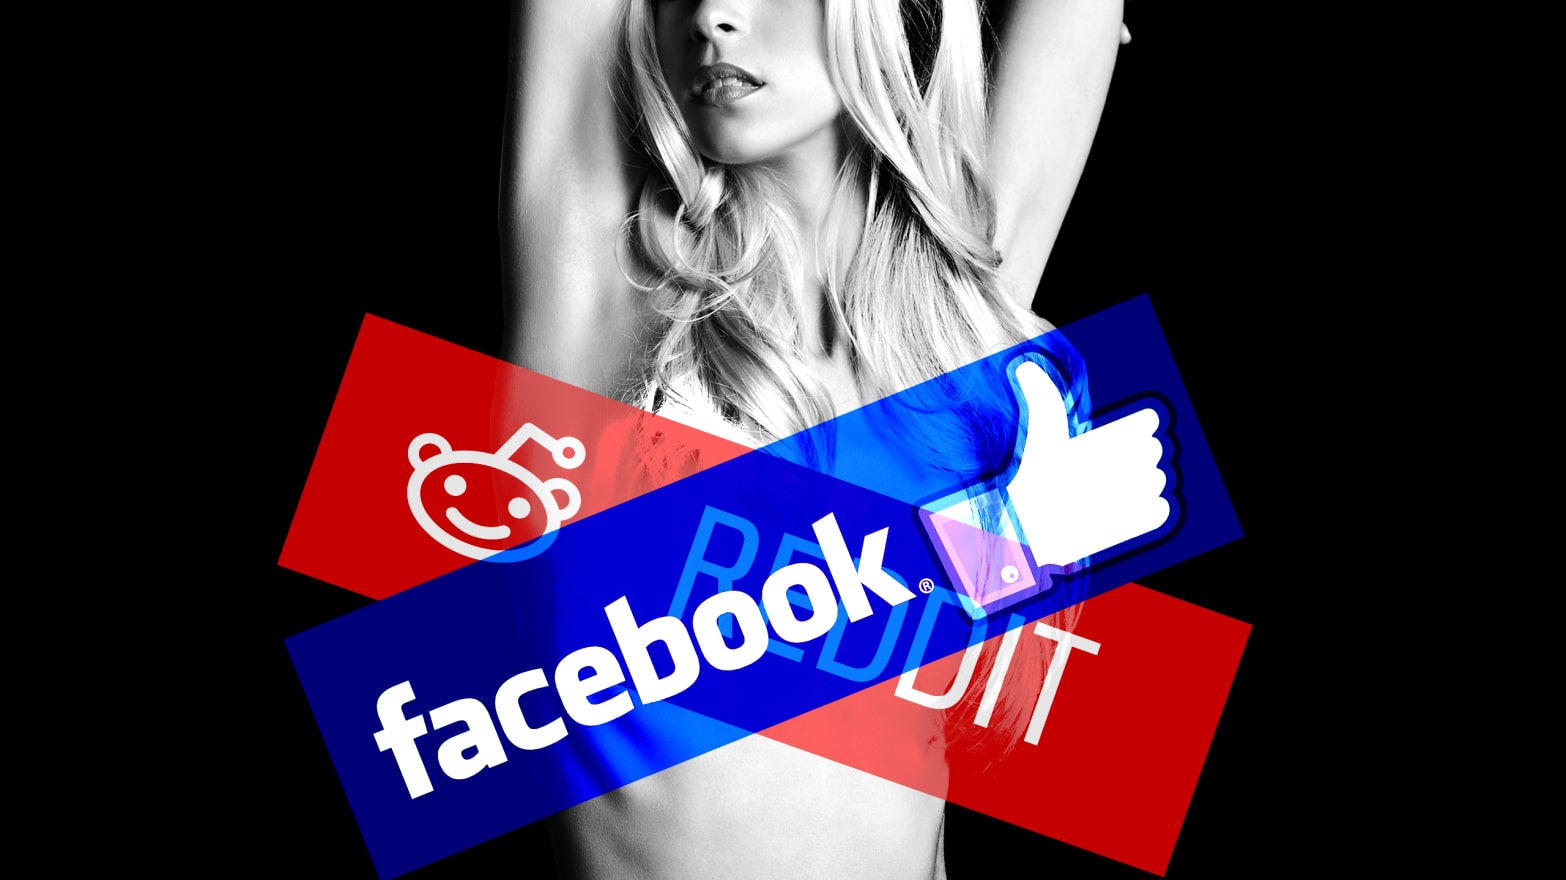 Erase Porn - Porn Stars Want to Know: Why Did Facebook Delete Me?